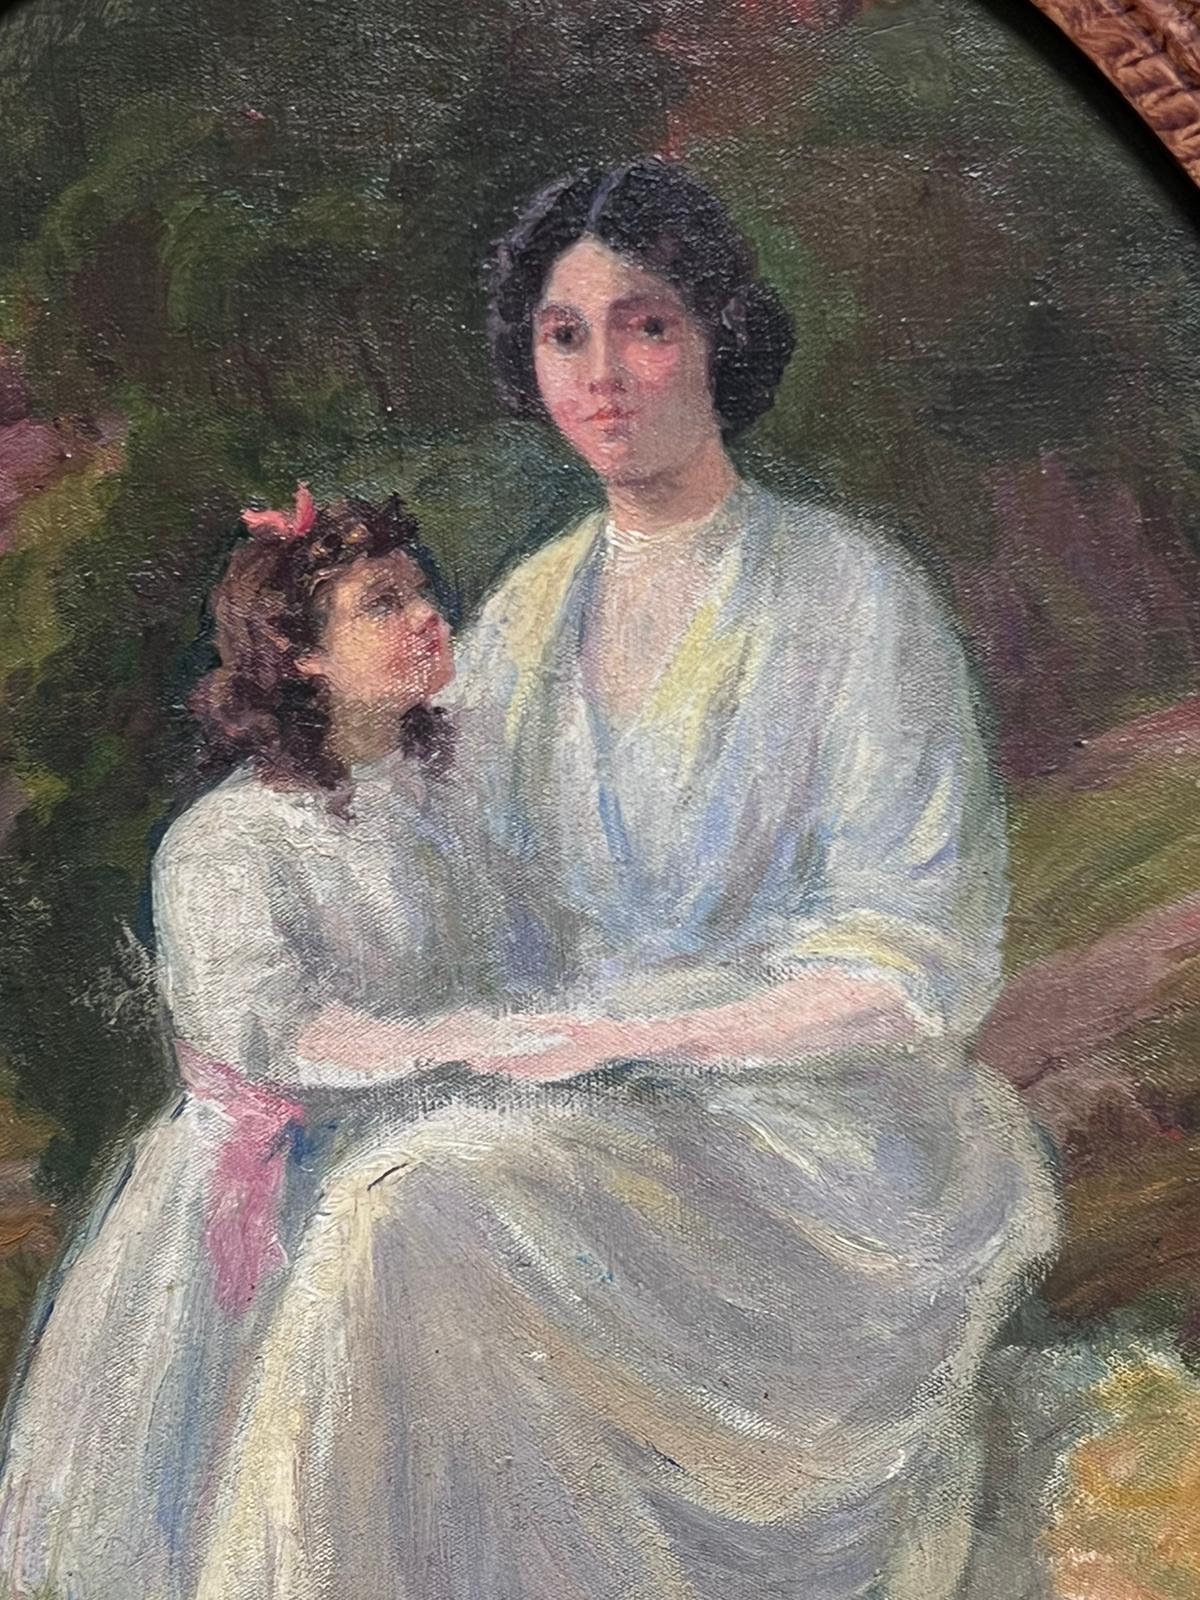 Mother & Daughter
French artist, late 19th century
signed oil on board, framed
framed: 22.5 x 18.5 inches
board: 20 x 15 inches
provenance: private collection, France
condition: very good and sound condition